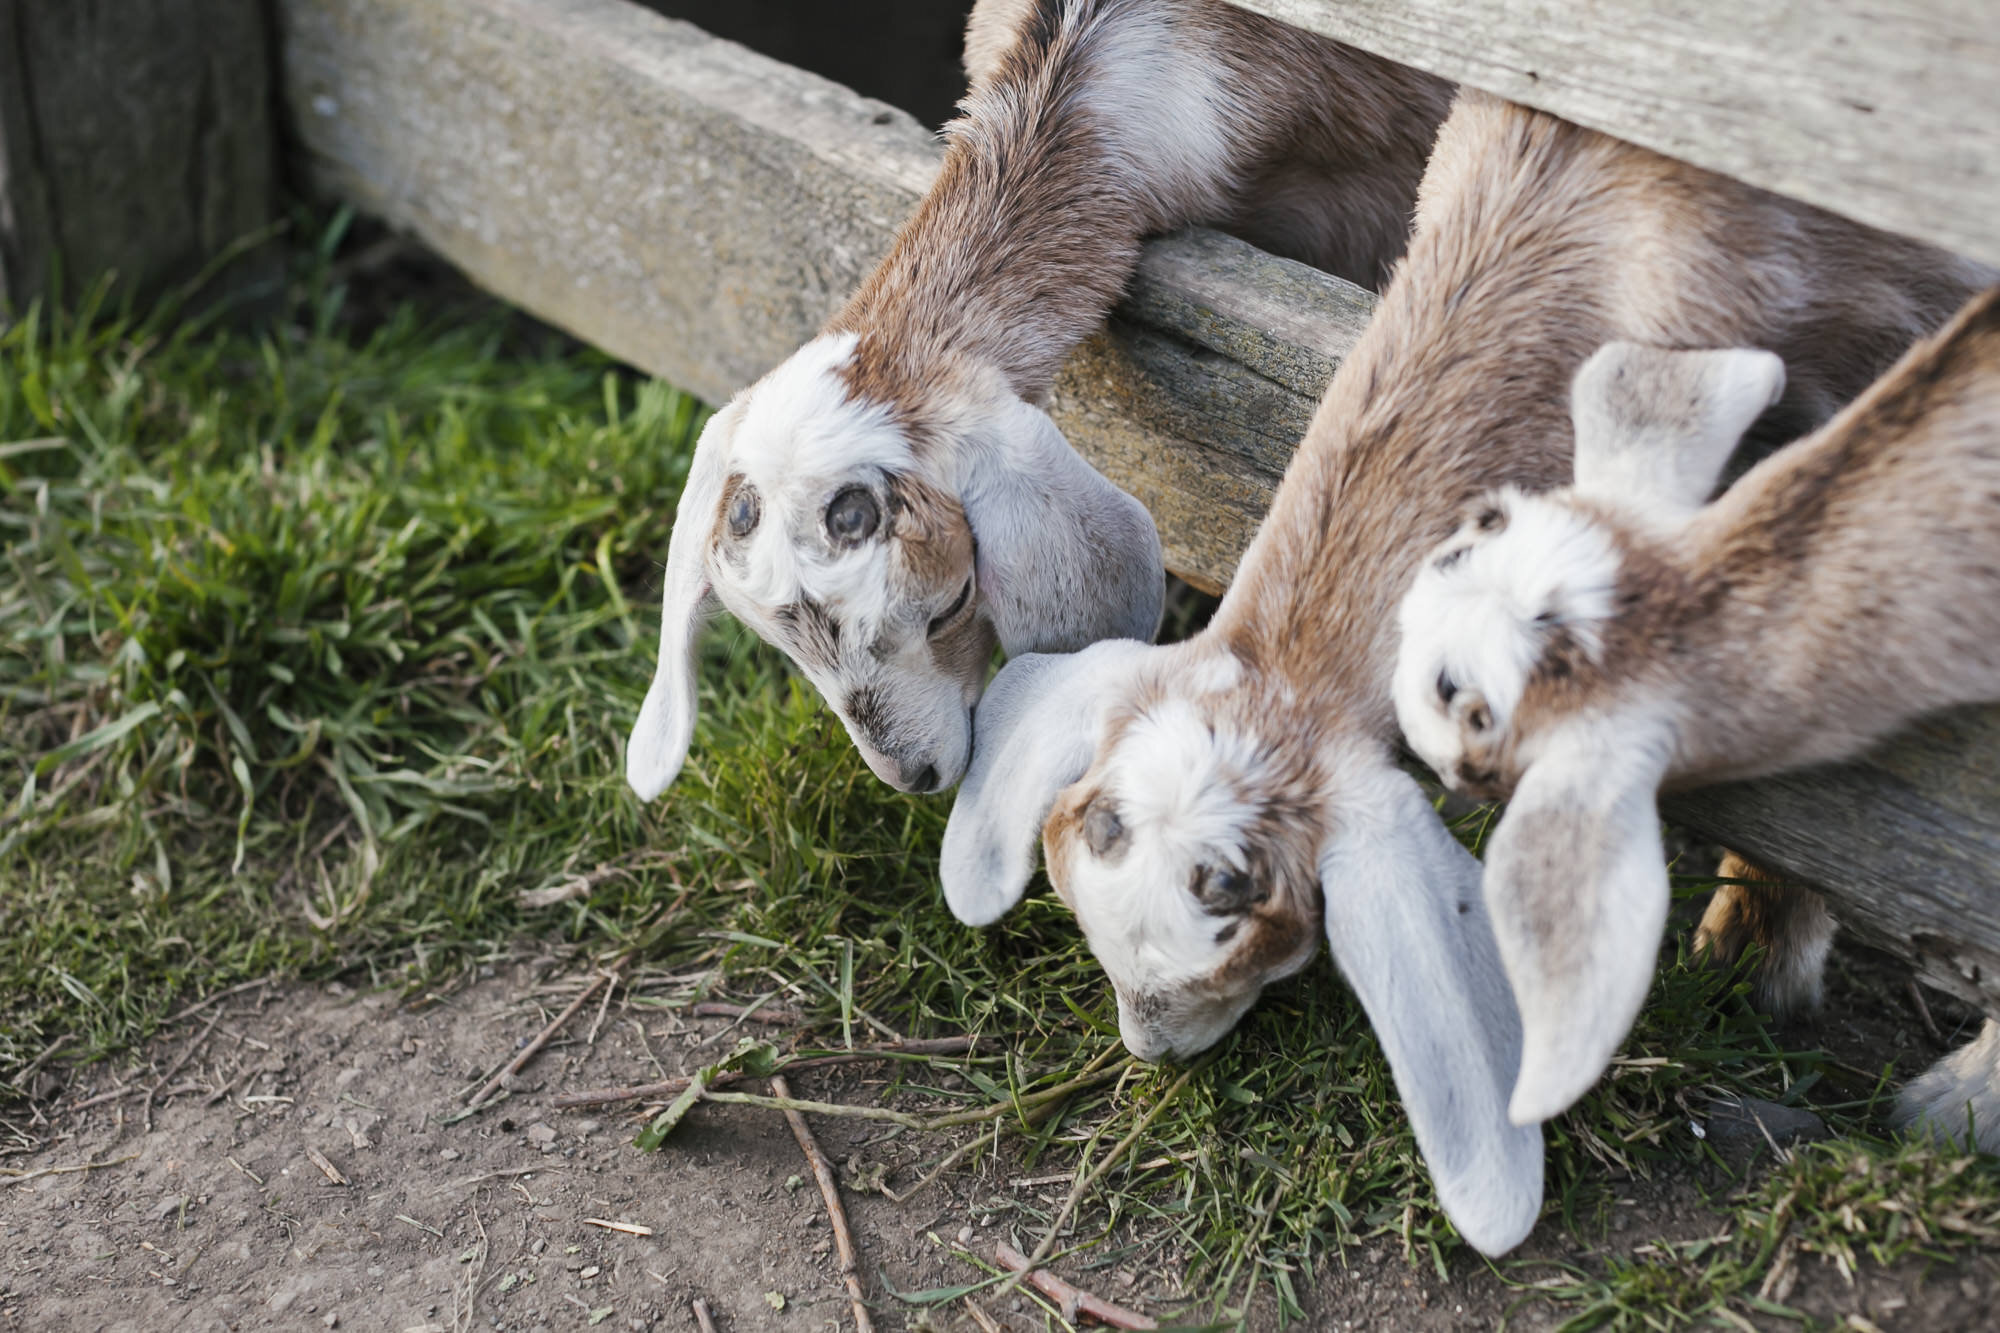 Spring baby goats at Slide Ranch during engagement session